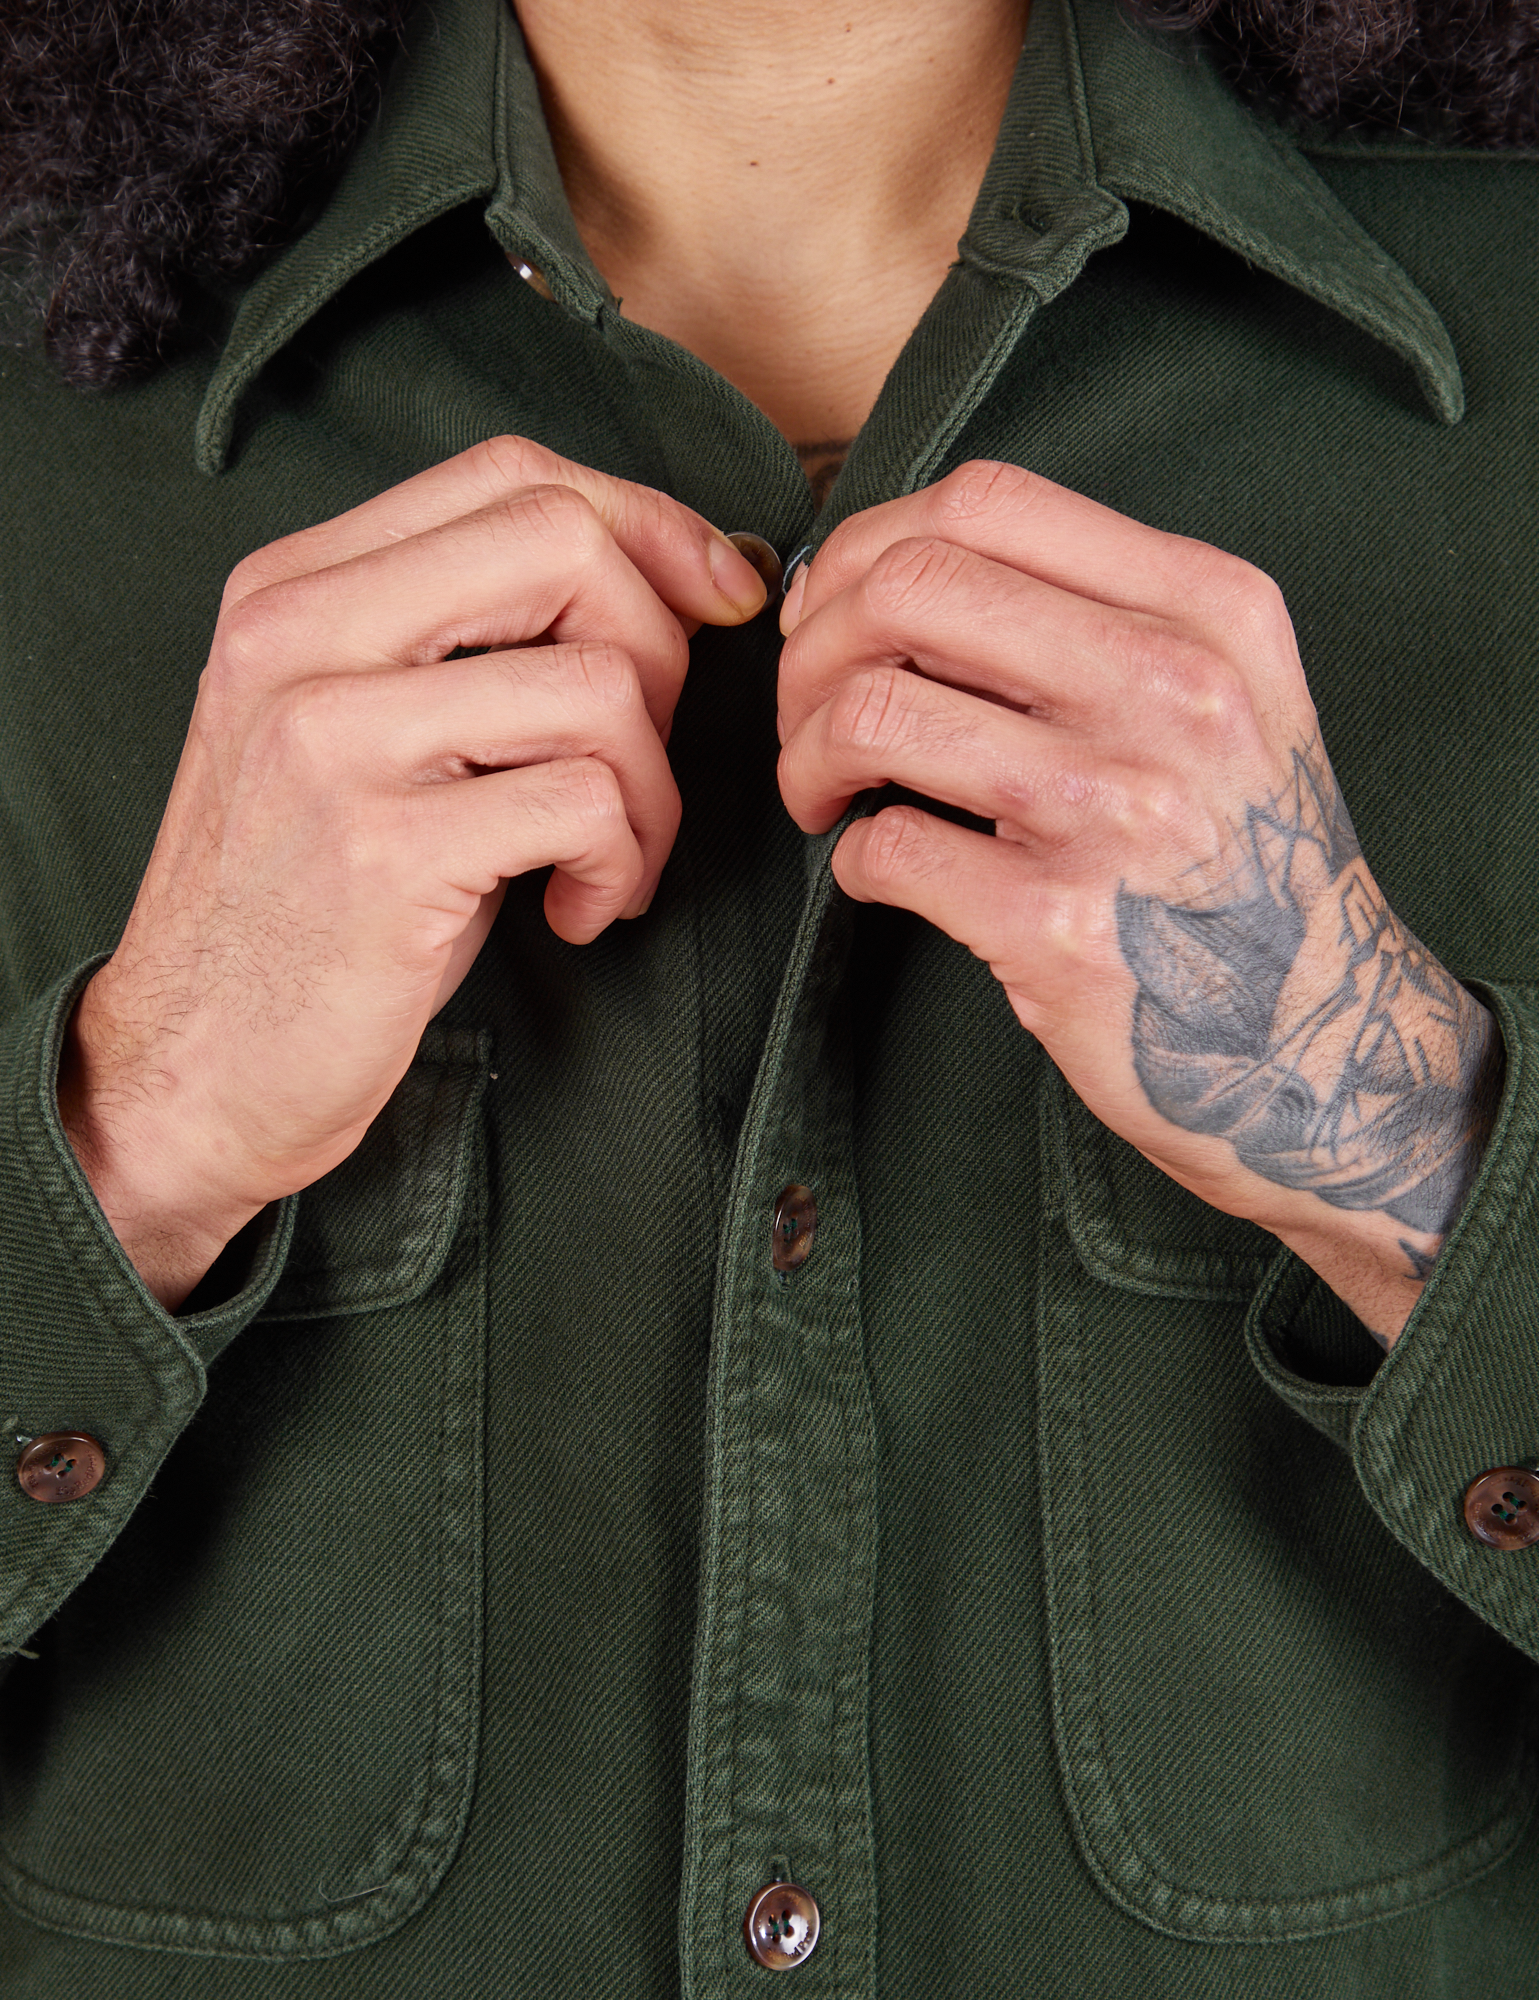 Flannel Overshirt in Swamp Green front close up. Jesse is buttoning up the shirt